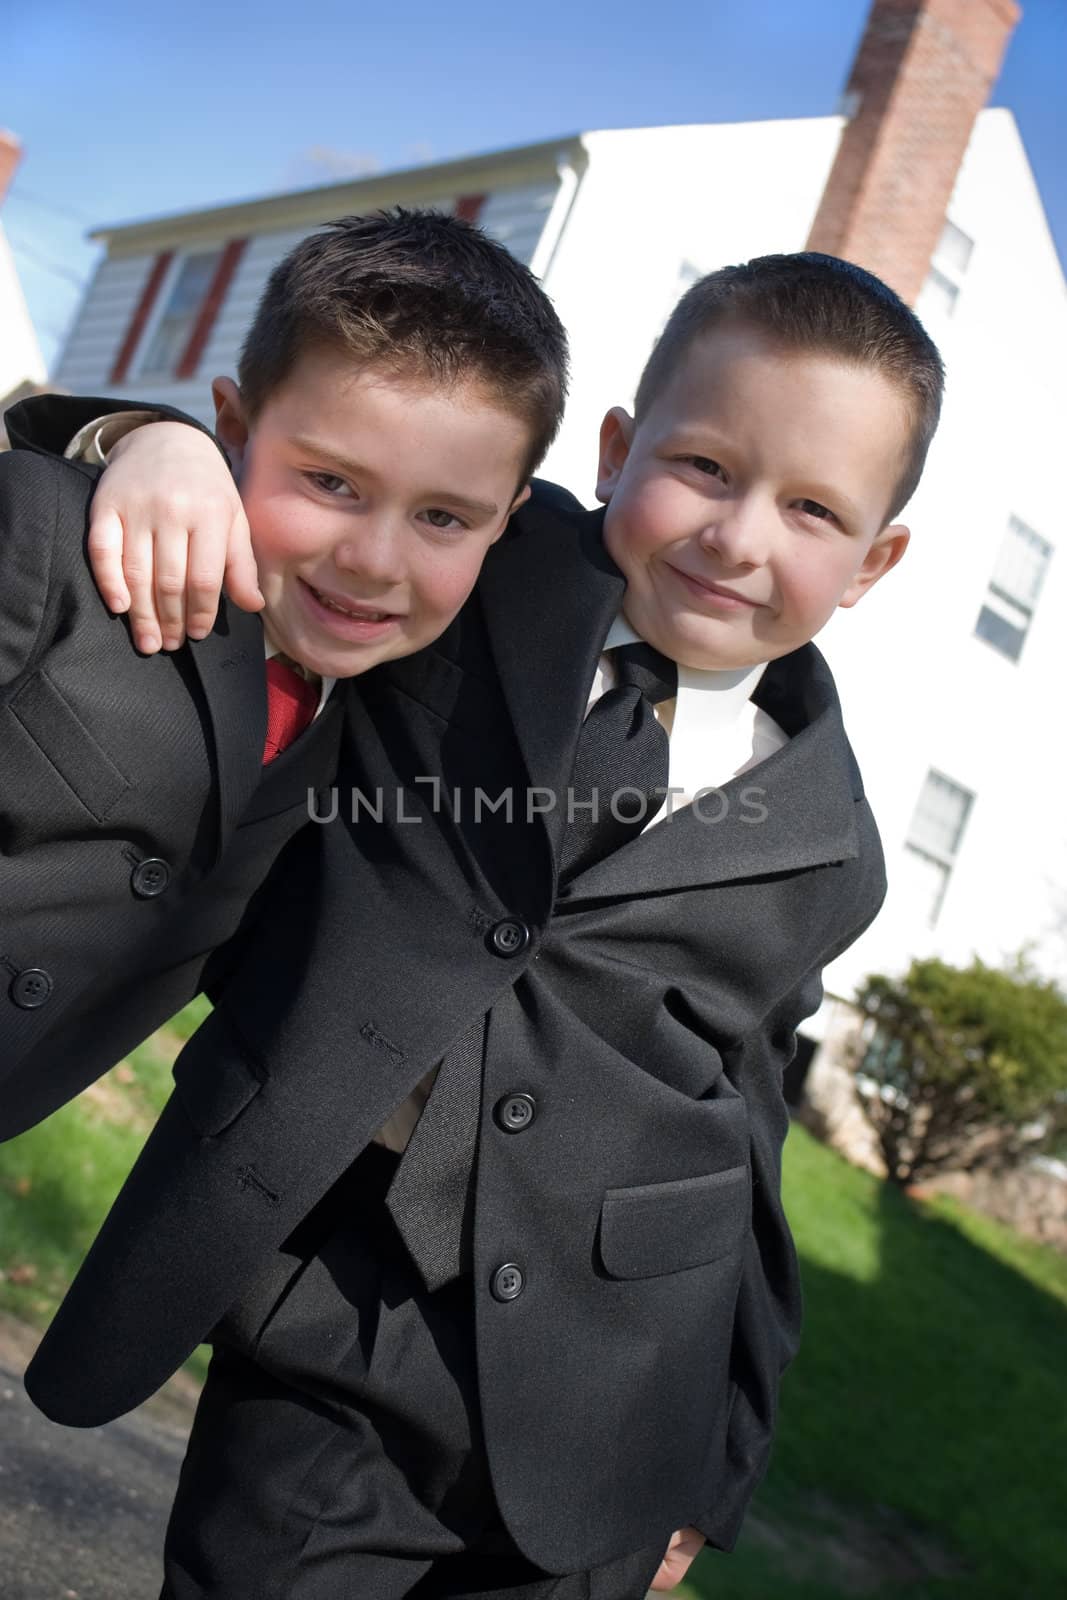 Two happy young boys dressed in suits with smiles on their faces.